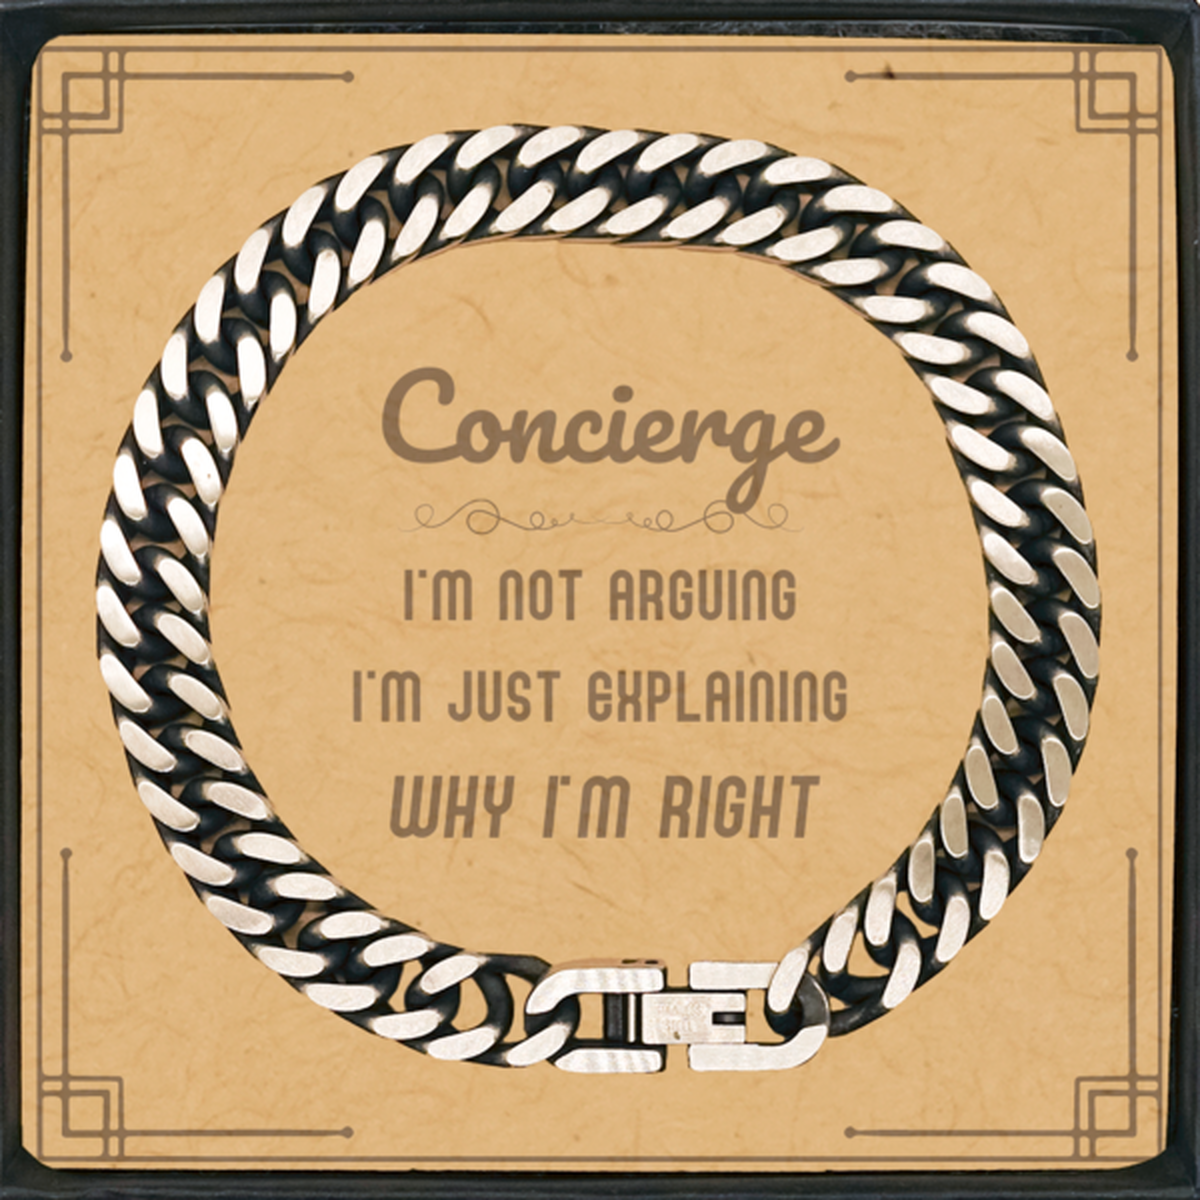 Concierge I'm not Arguing. I'm Just Explaining Why I'm RIGHT Cuban Link Chain Bracelet, Funny Saying Quote Concierge Gifts For Concierge Message Card Graduation Birthday Christmas Gifts for Men Women Coworker